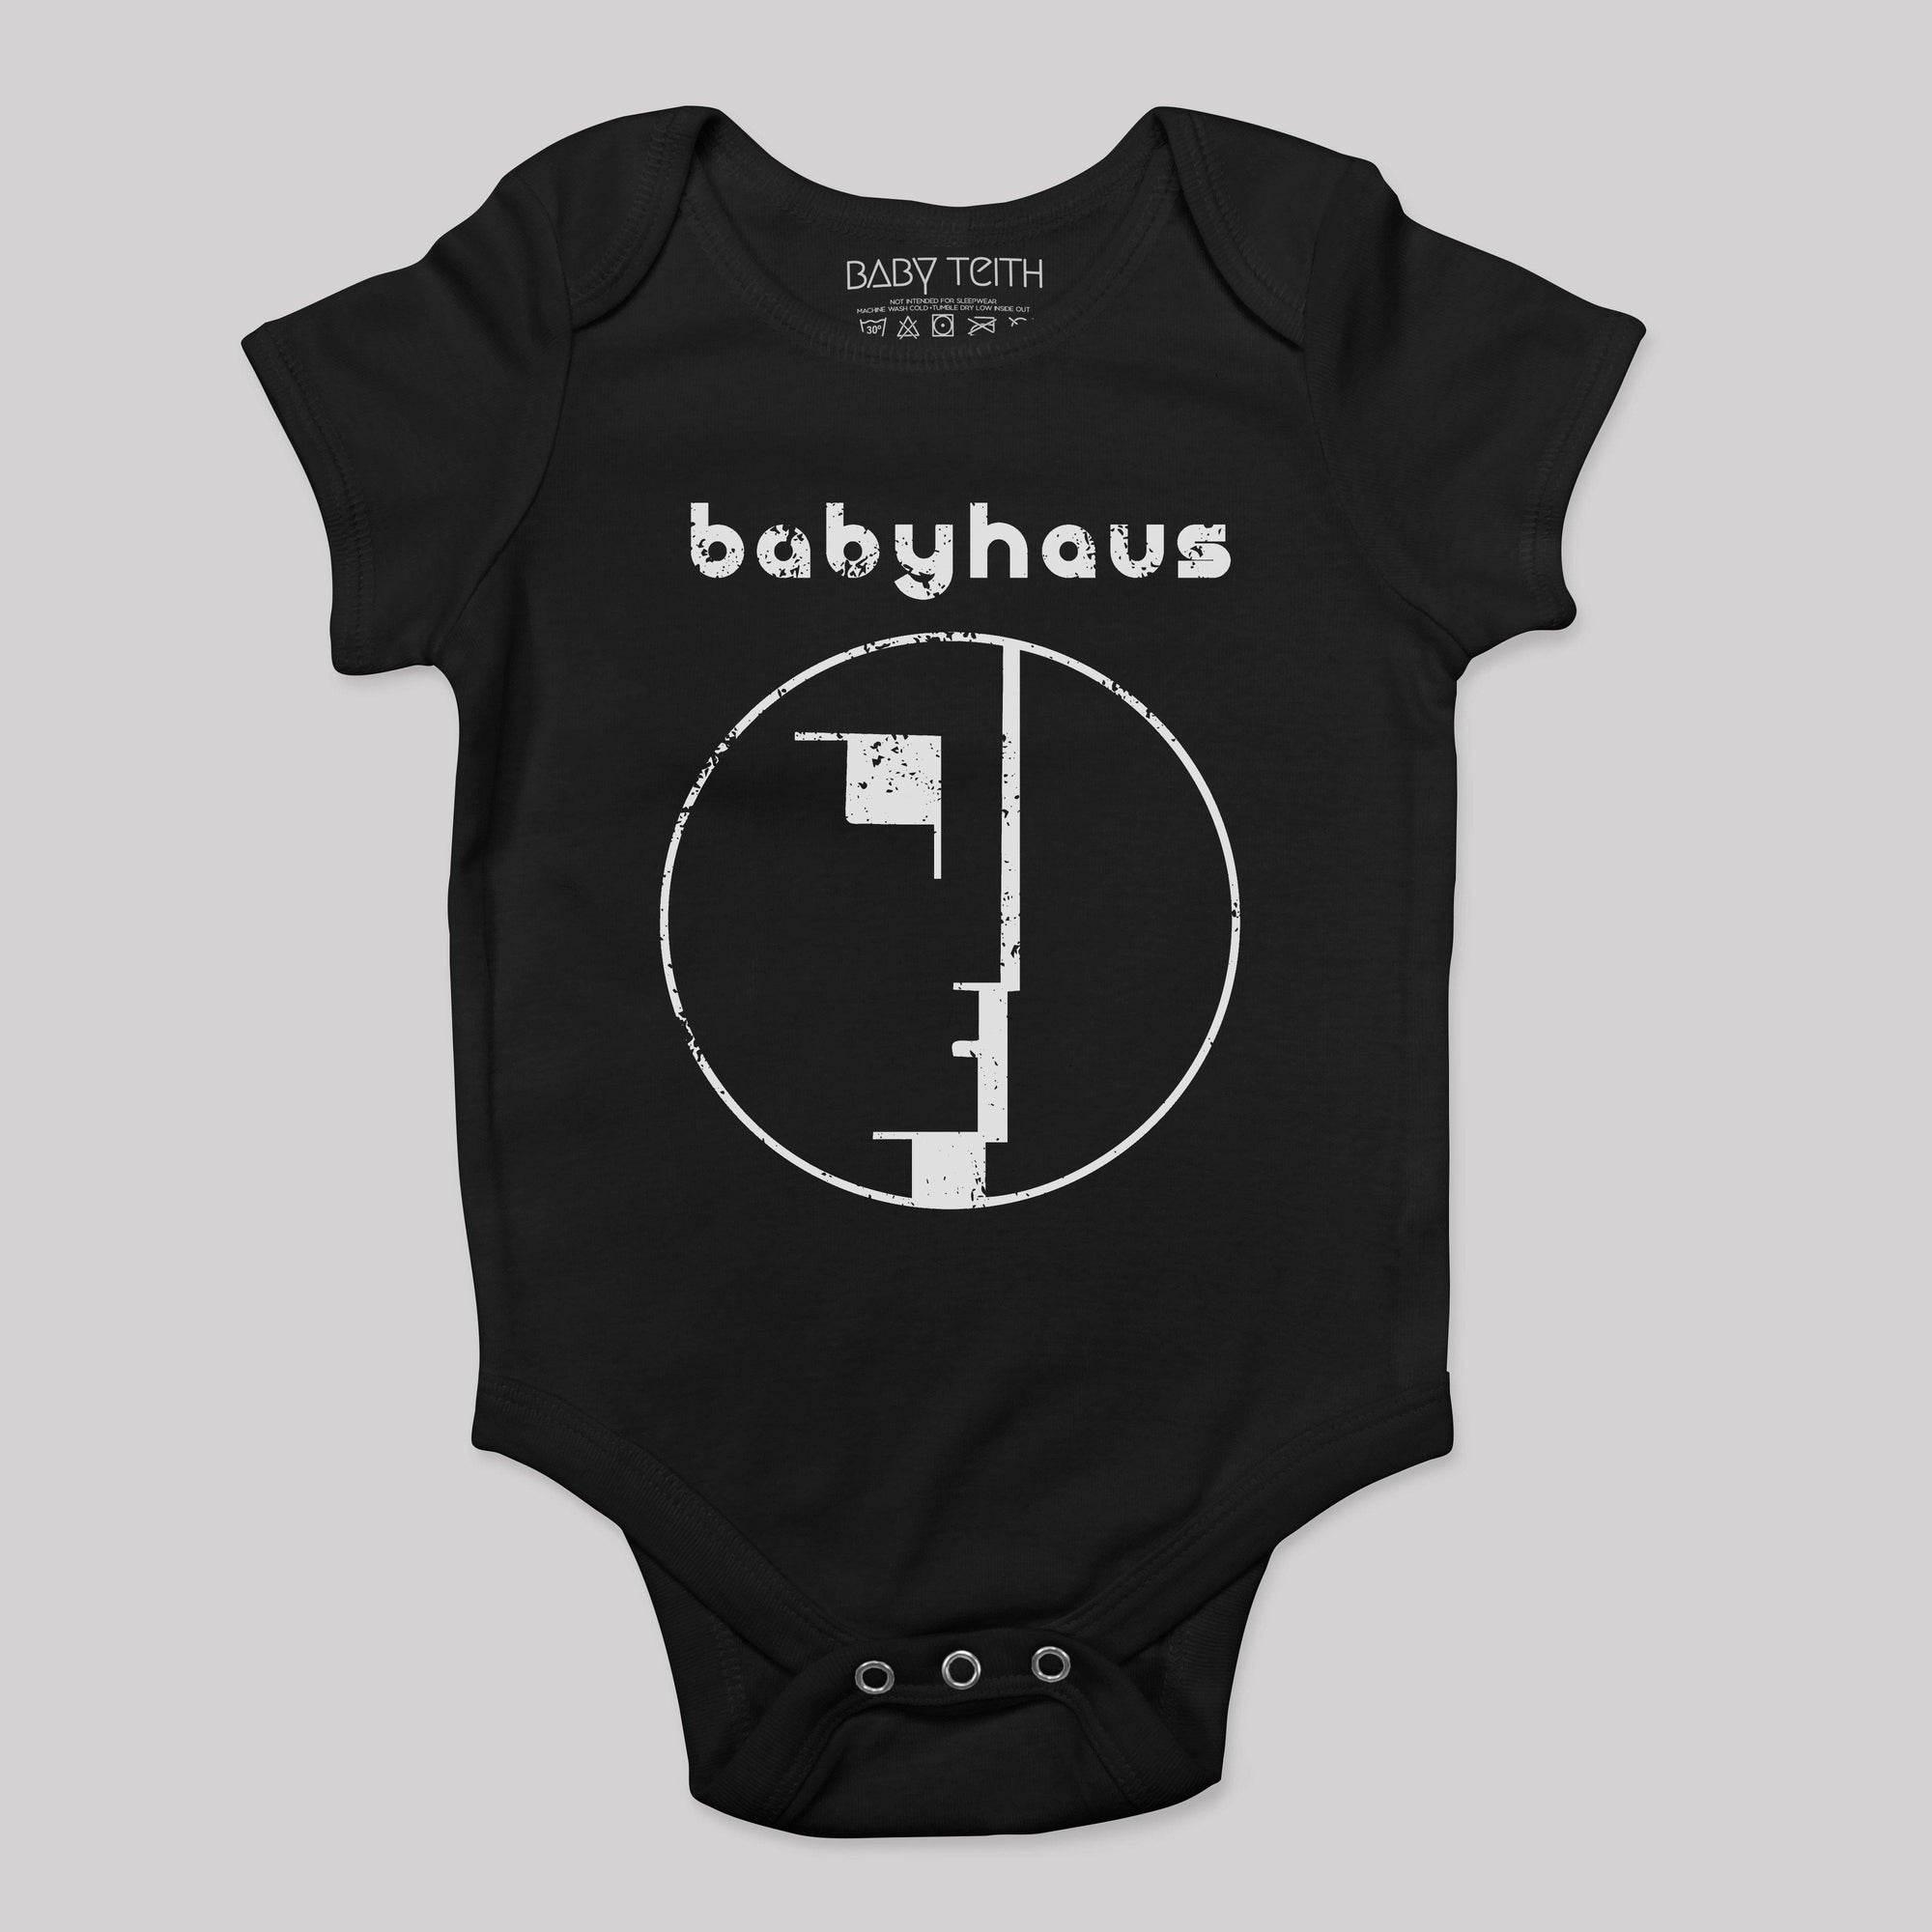 &quot;BabyHaus&quot; Baby Bodysuit Inspired by Bauhaus - Baby Teith